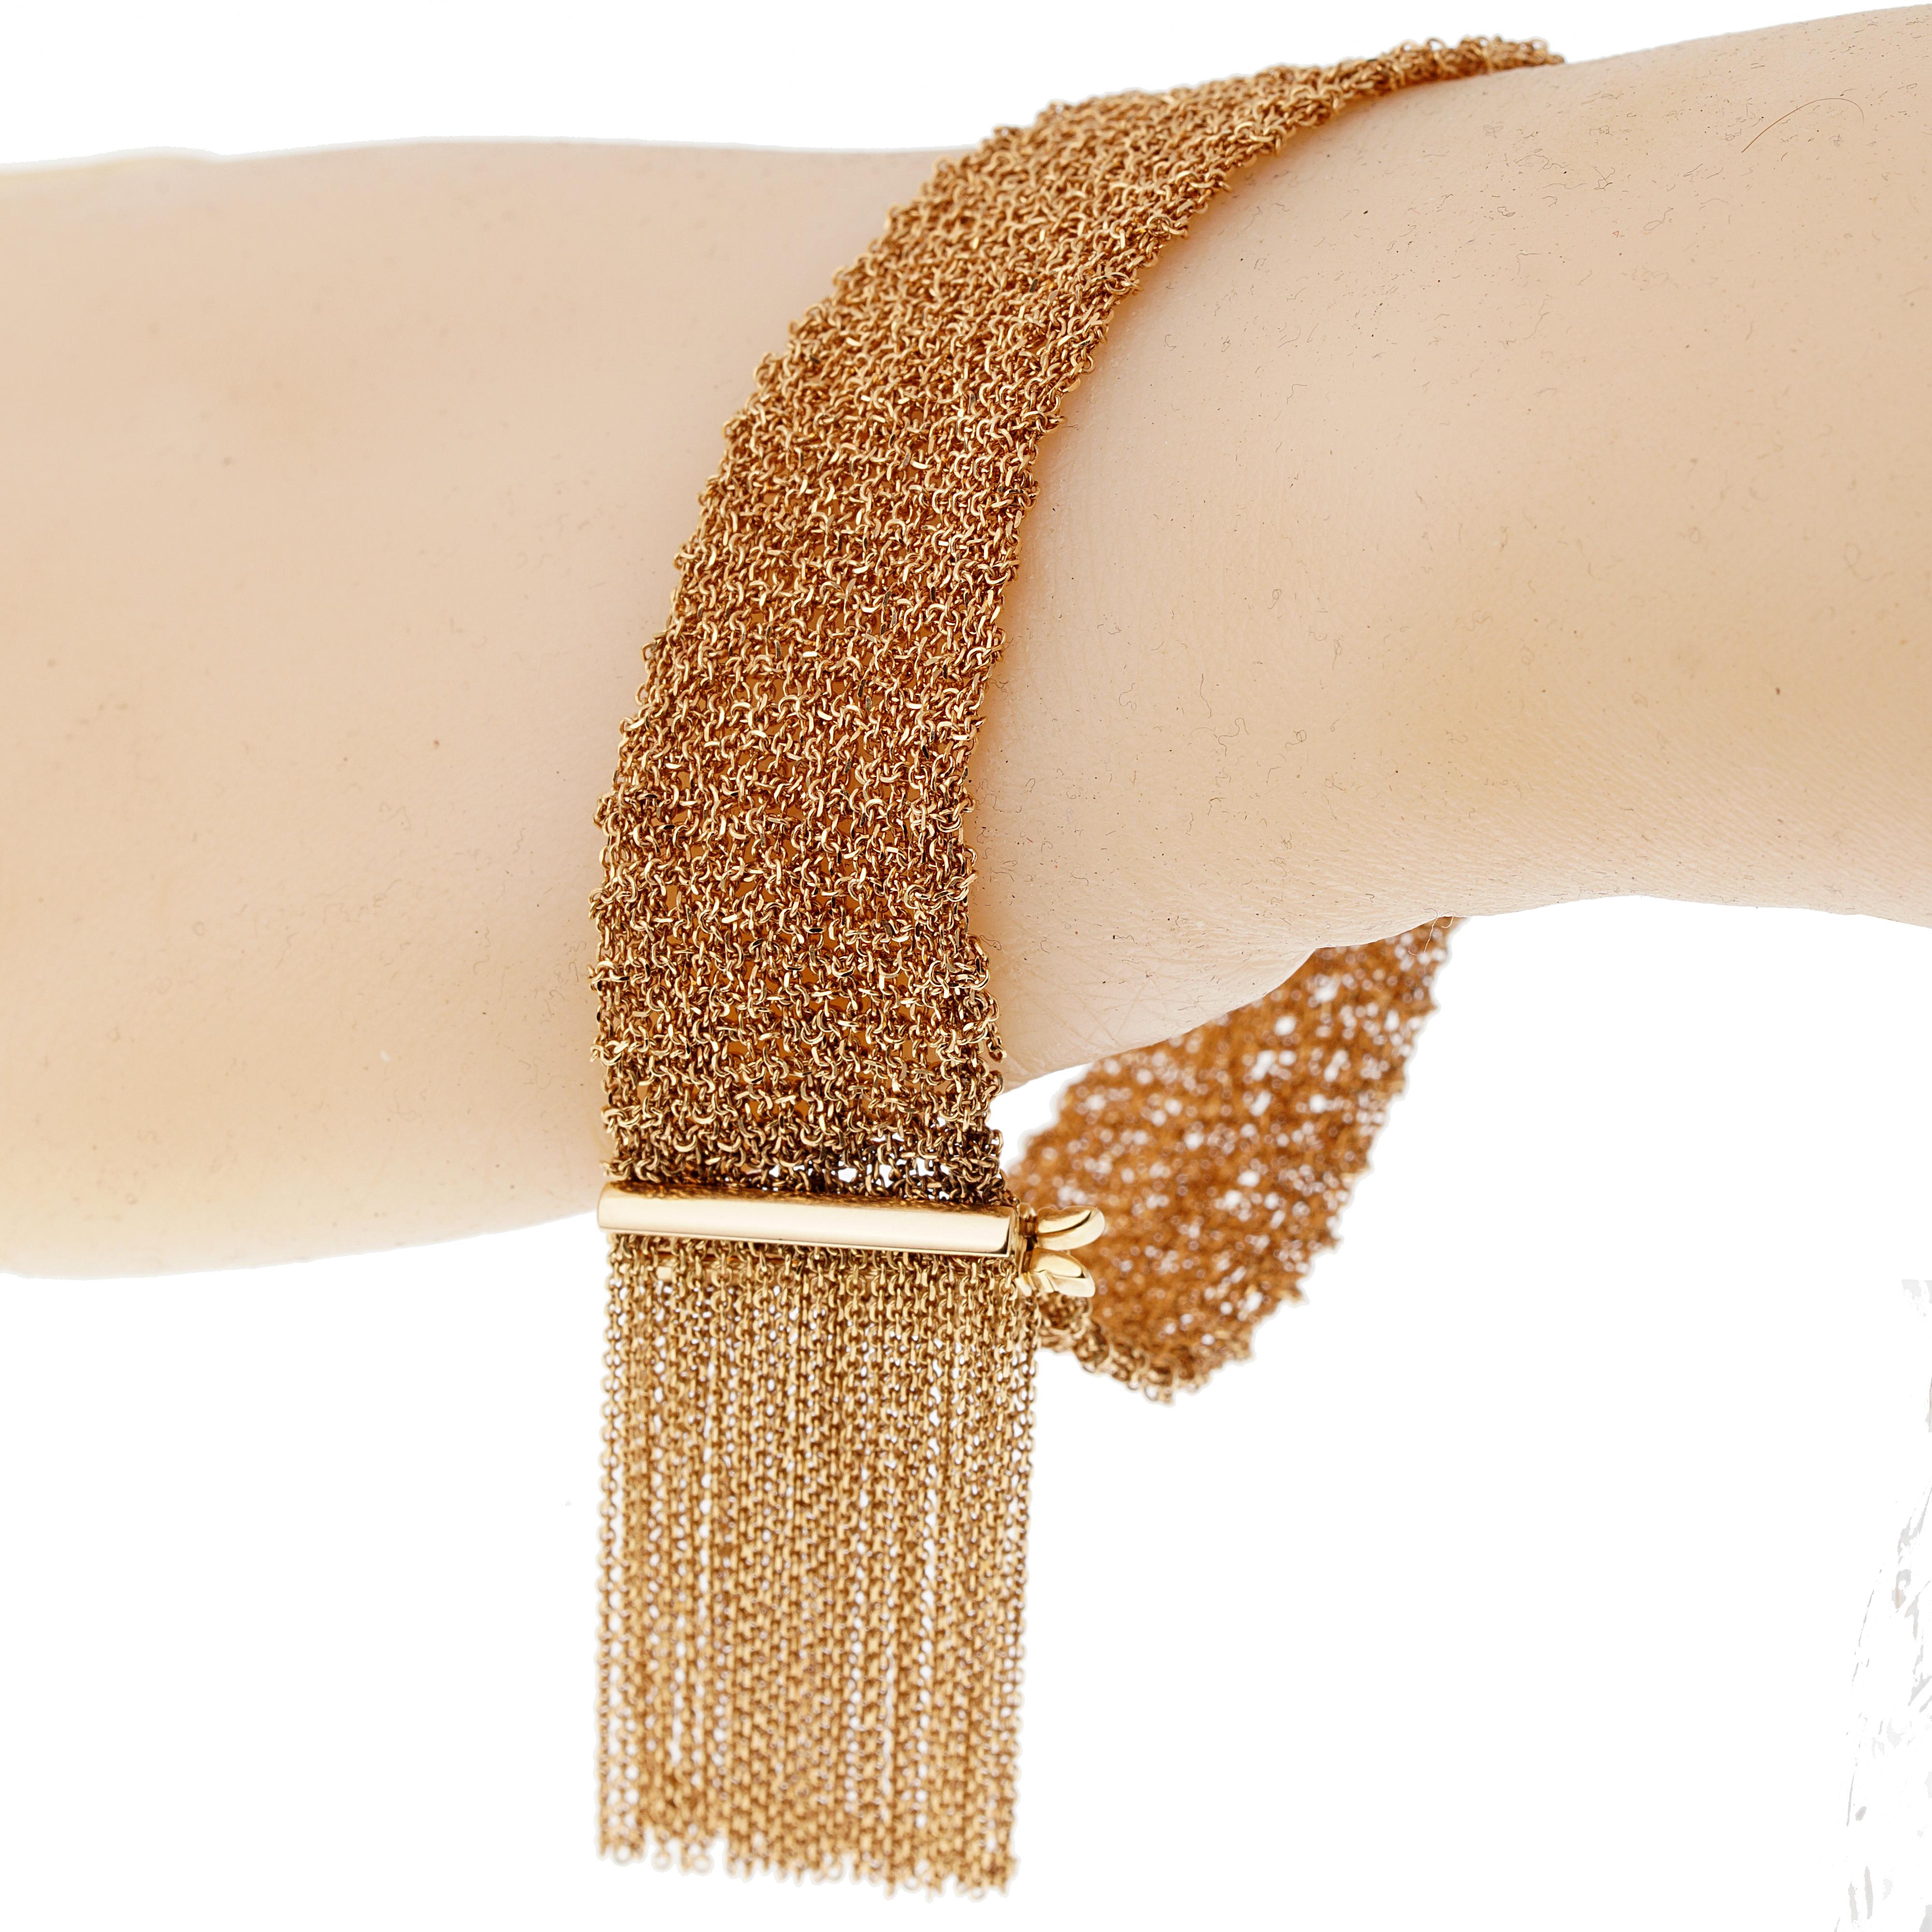 In incredibly comfortable Boucheron scarf bracelet showcasing fine trace-link chain, finished with fringes set in 18k rose gold, signed Boucheron, and numbered. The bracelet has a length of 7